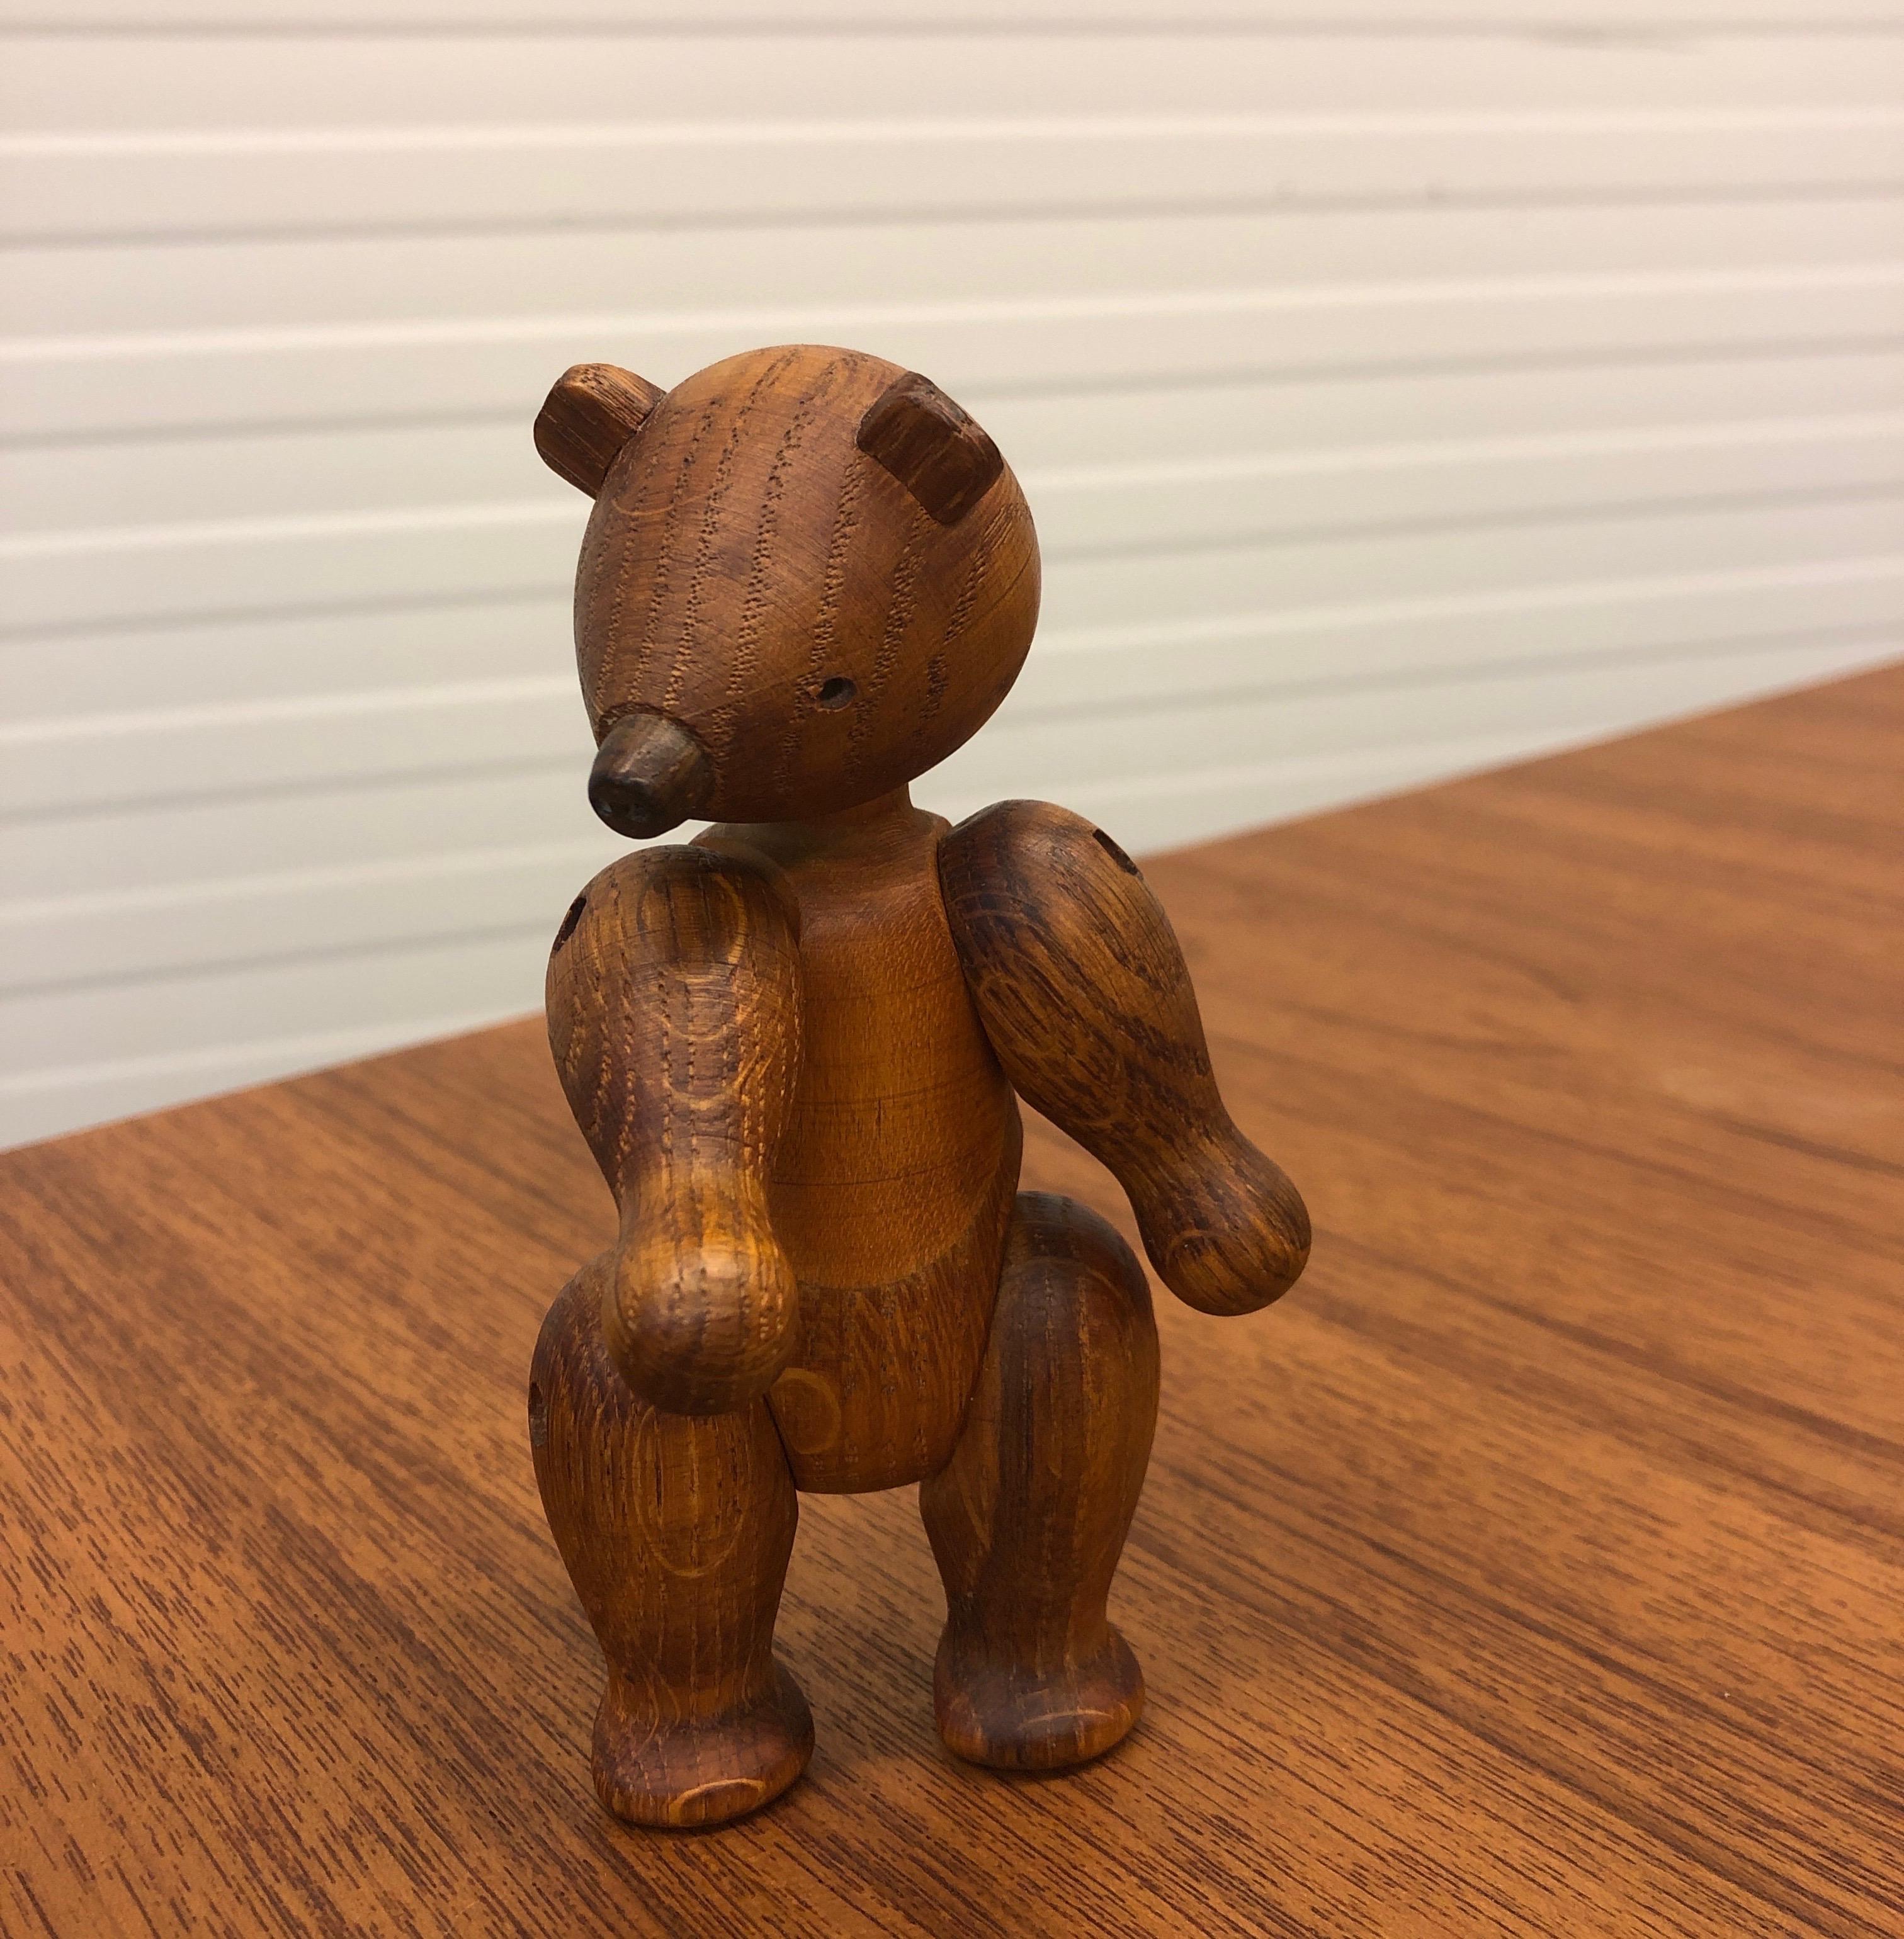 Original vintage genuine Kay Bojesen wooden articulated Bear toy. Designed and produced by Kay Bojesen, Denmark.

This beautiful toy is in wonderful condition, made from solid oak and maple.


